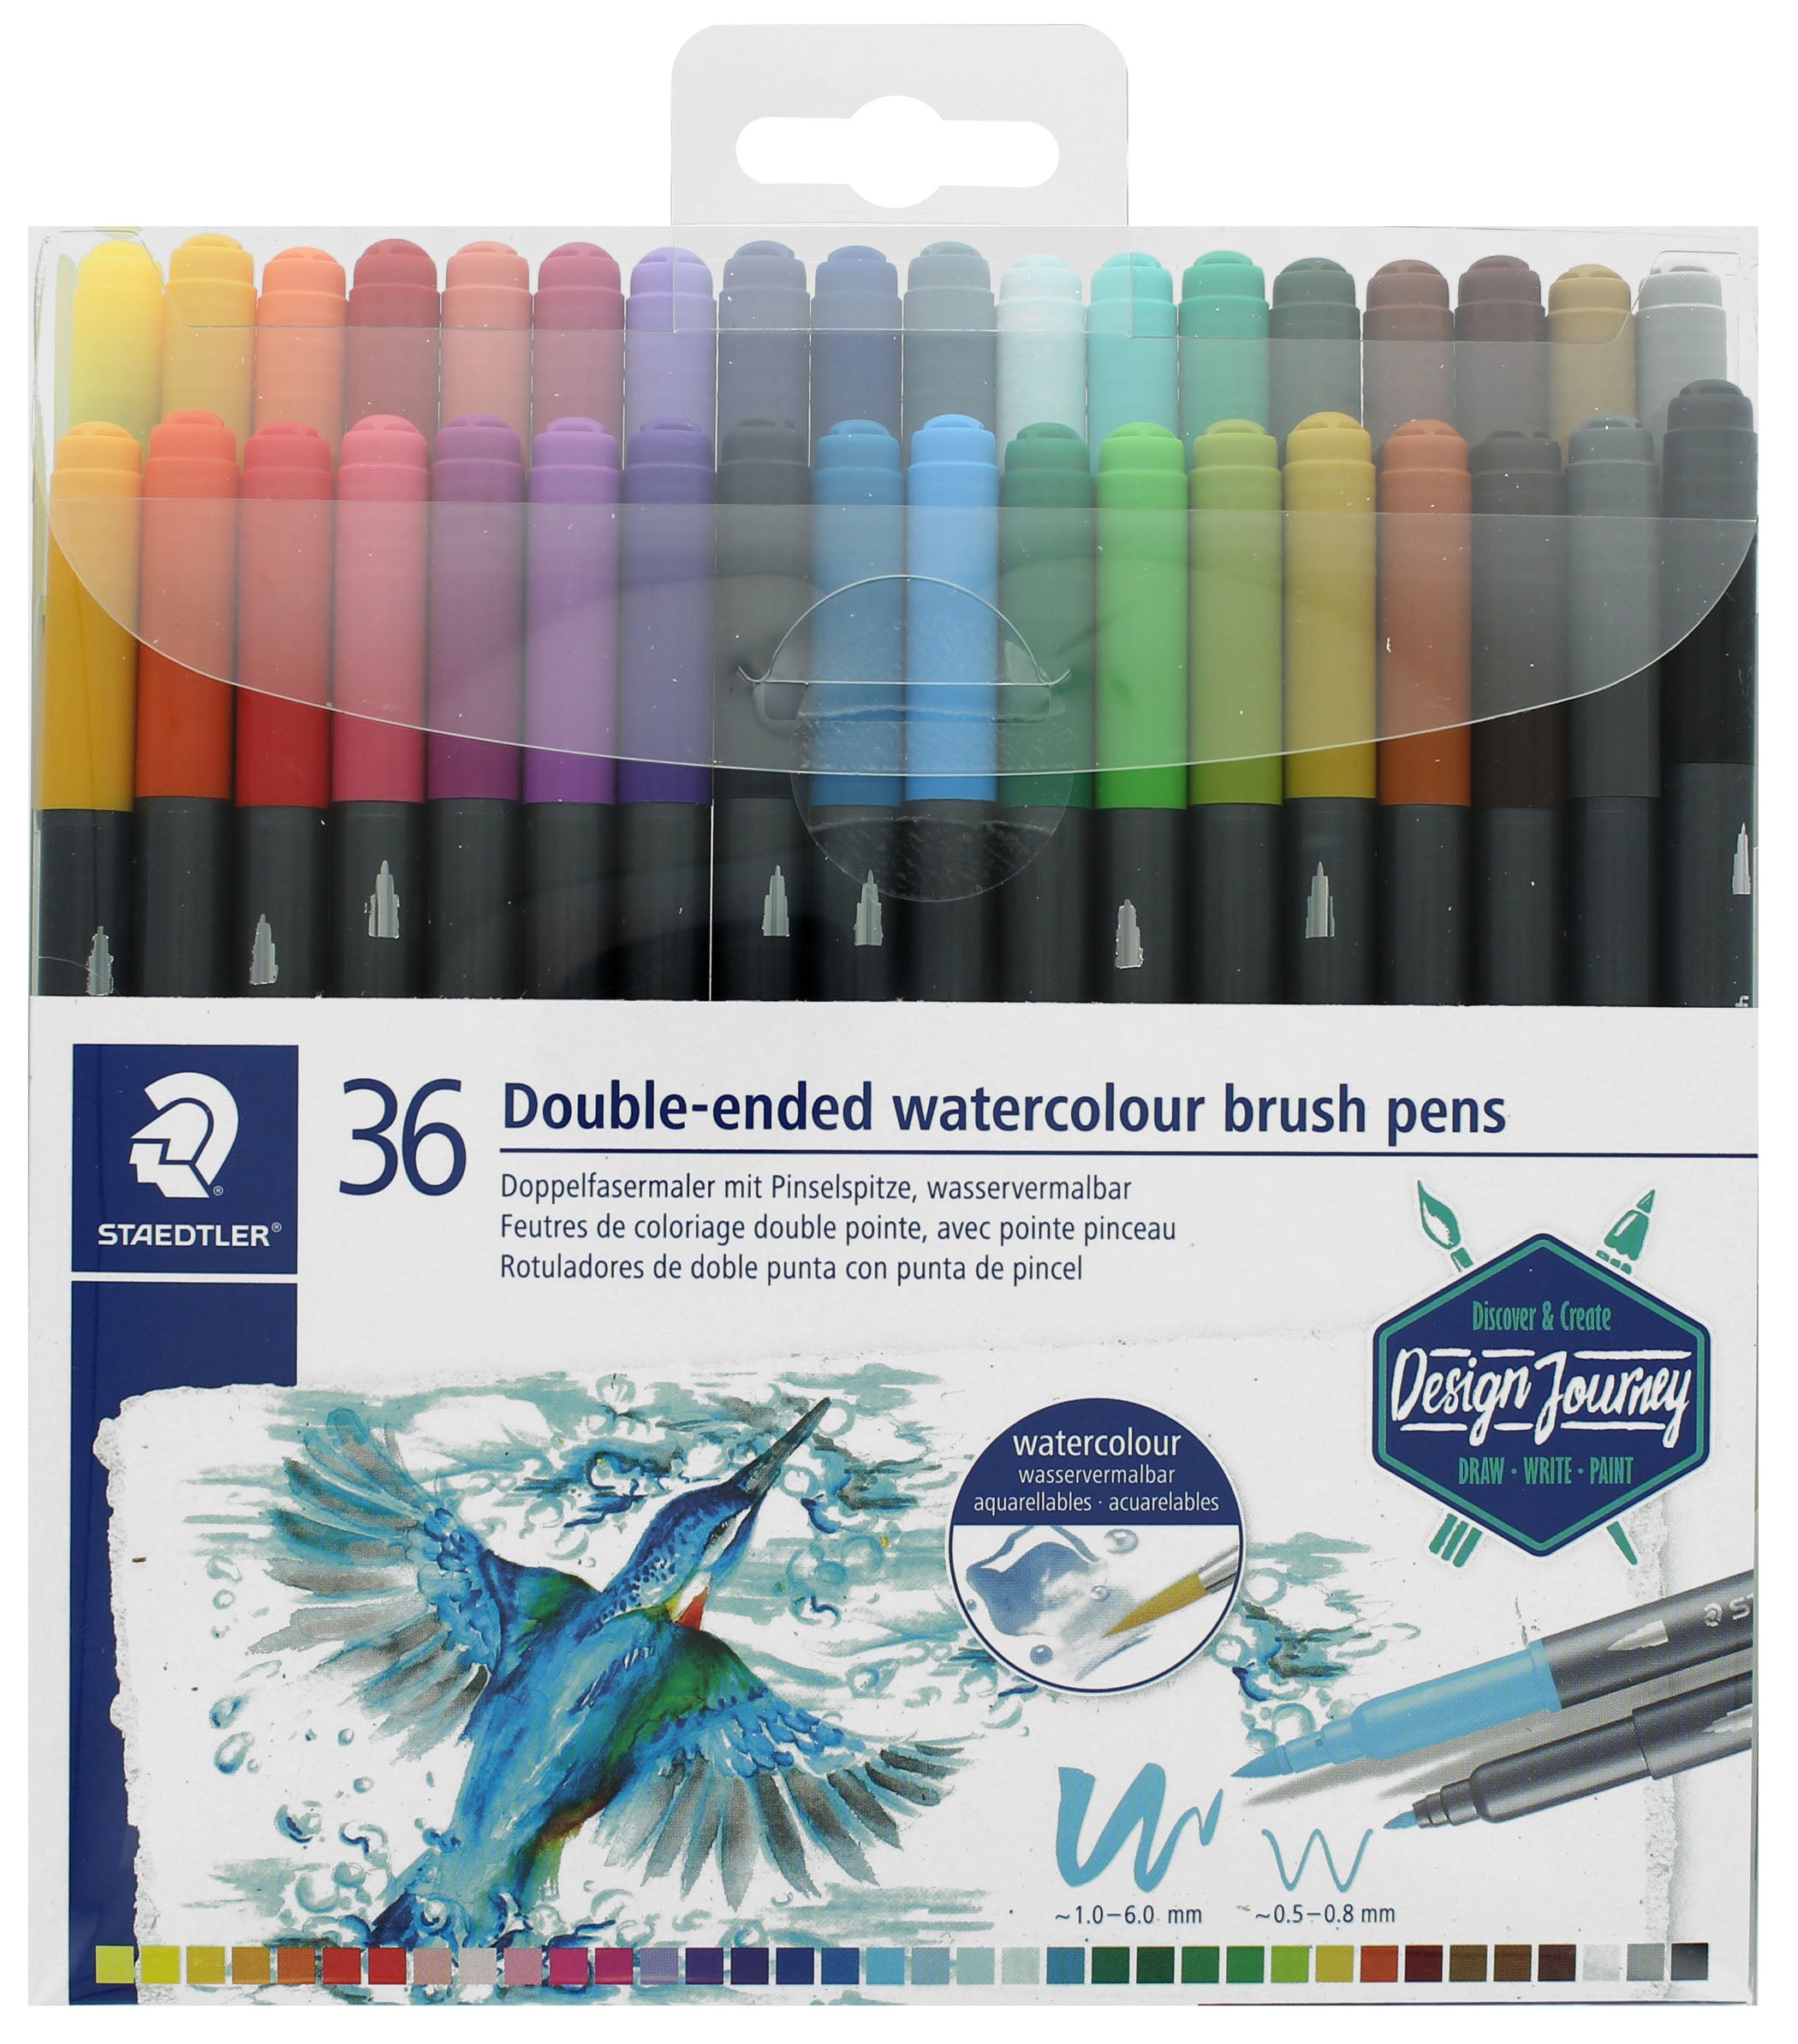 Staedtler Marsgraphic Duo Double-Ended Watercolor Brush Markers